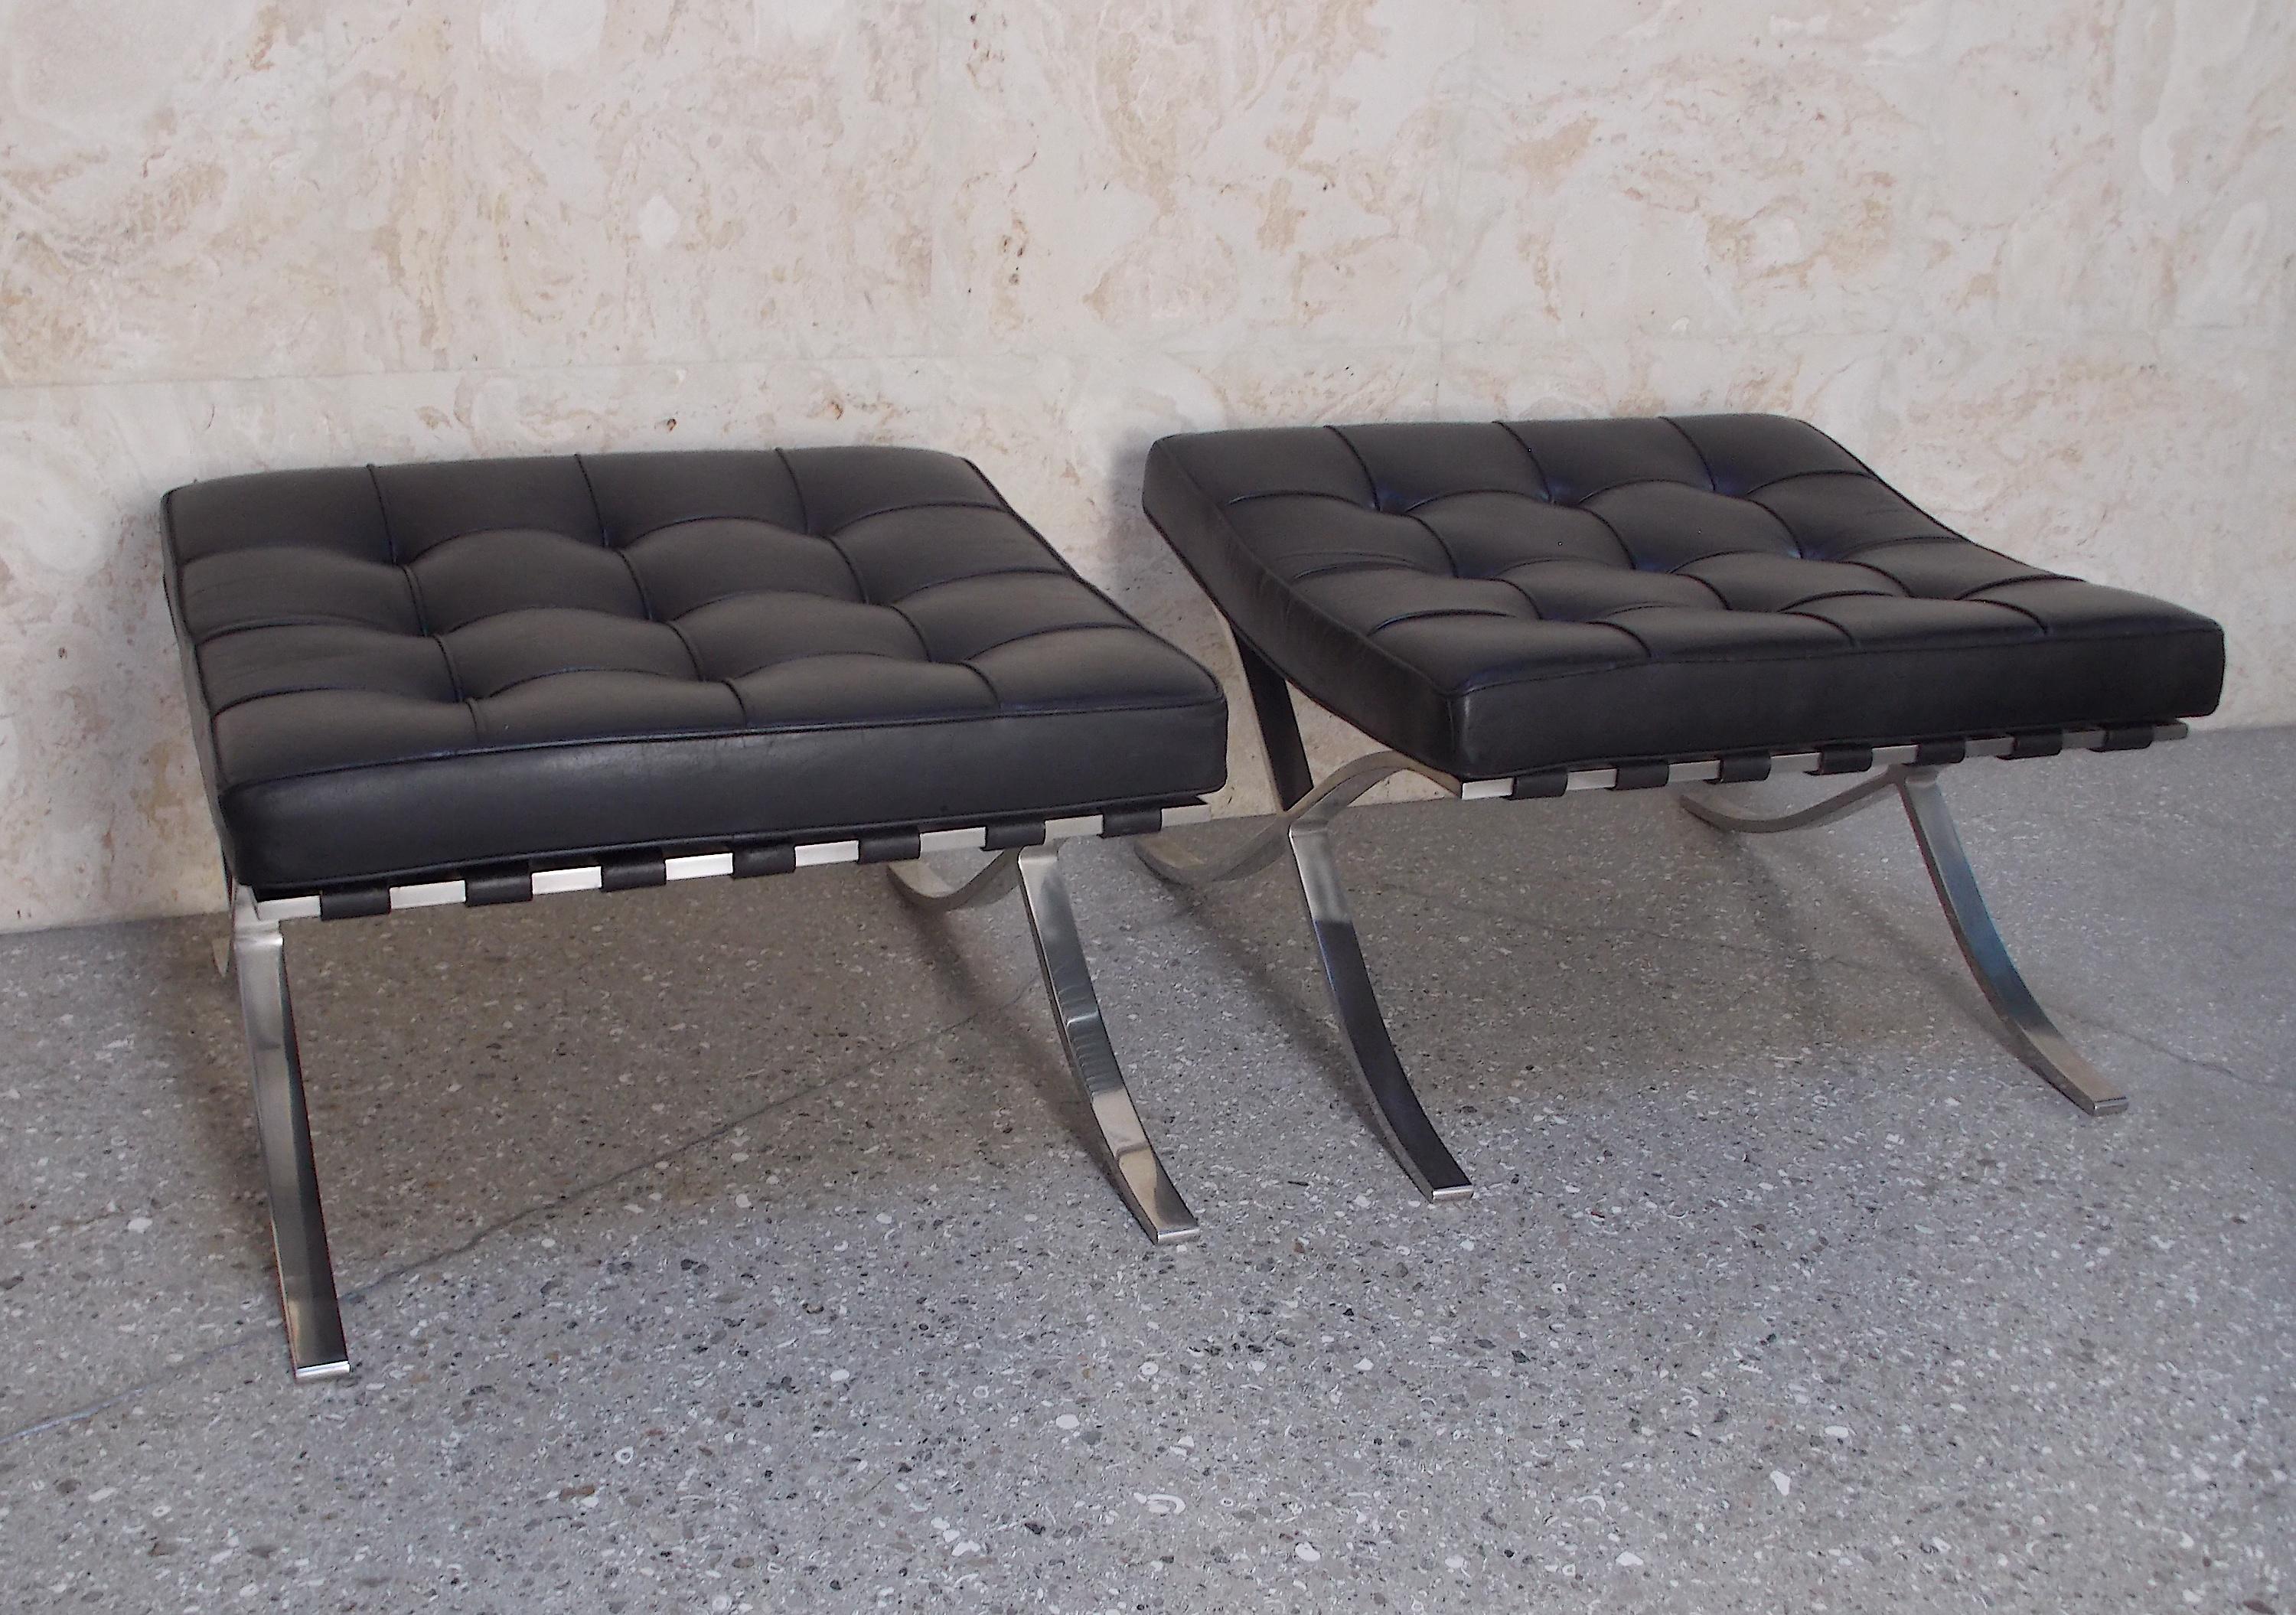 Pair of Barcelona Ottomans/ Stools manufactered by Knoll.